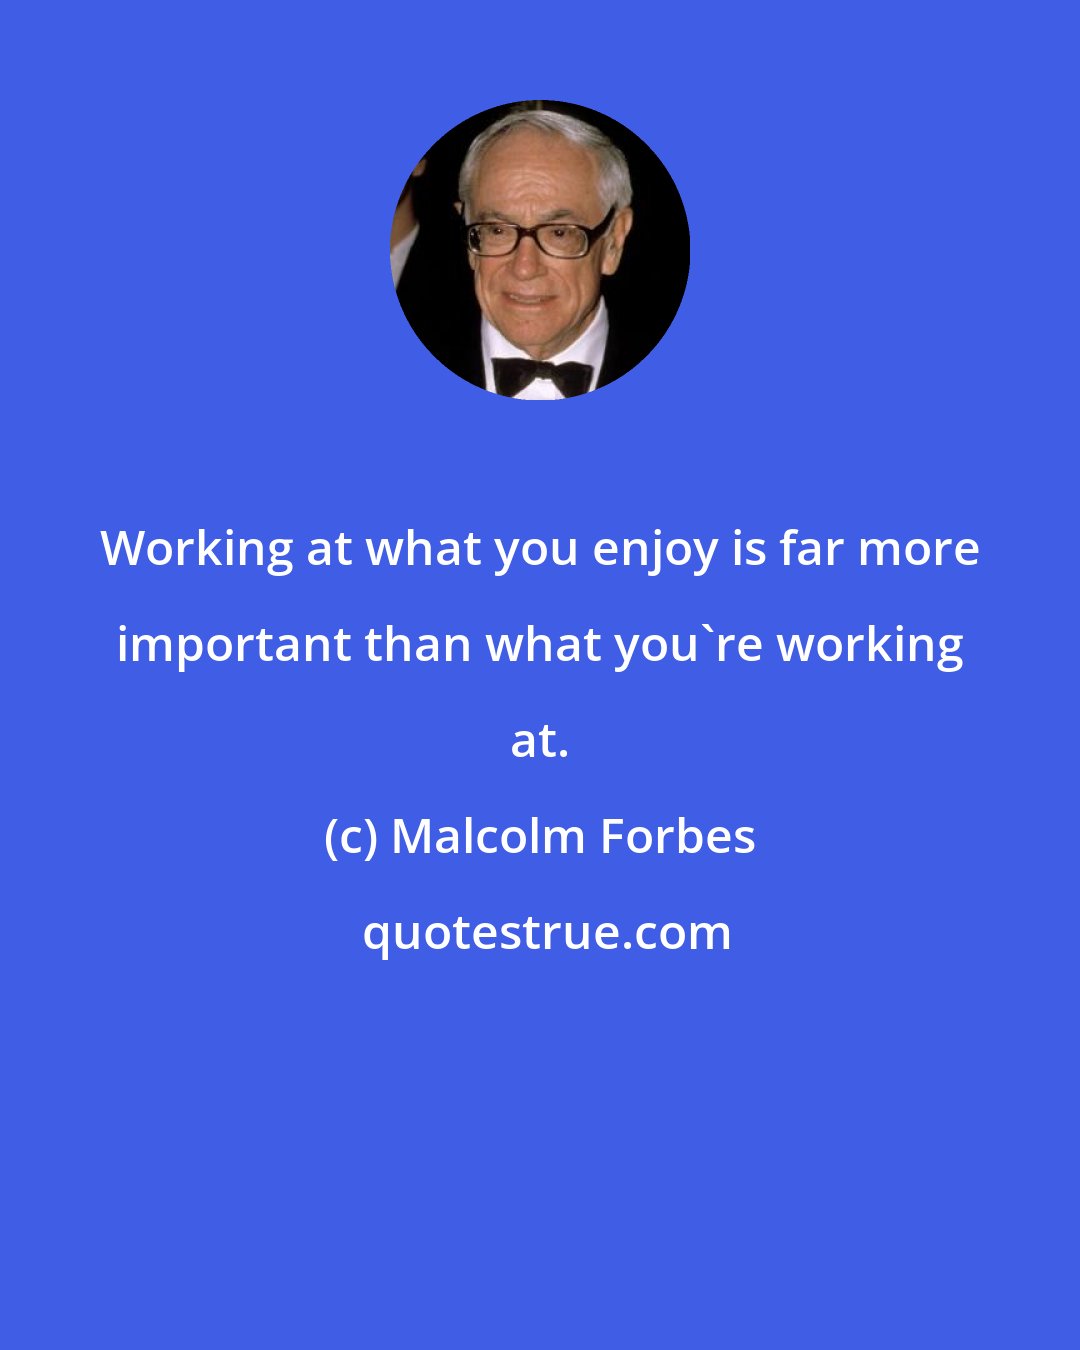 Malcolm Forbes: Working at what you enjoy is far more important than what you're working at.